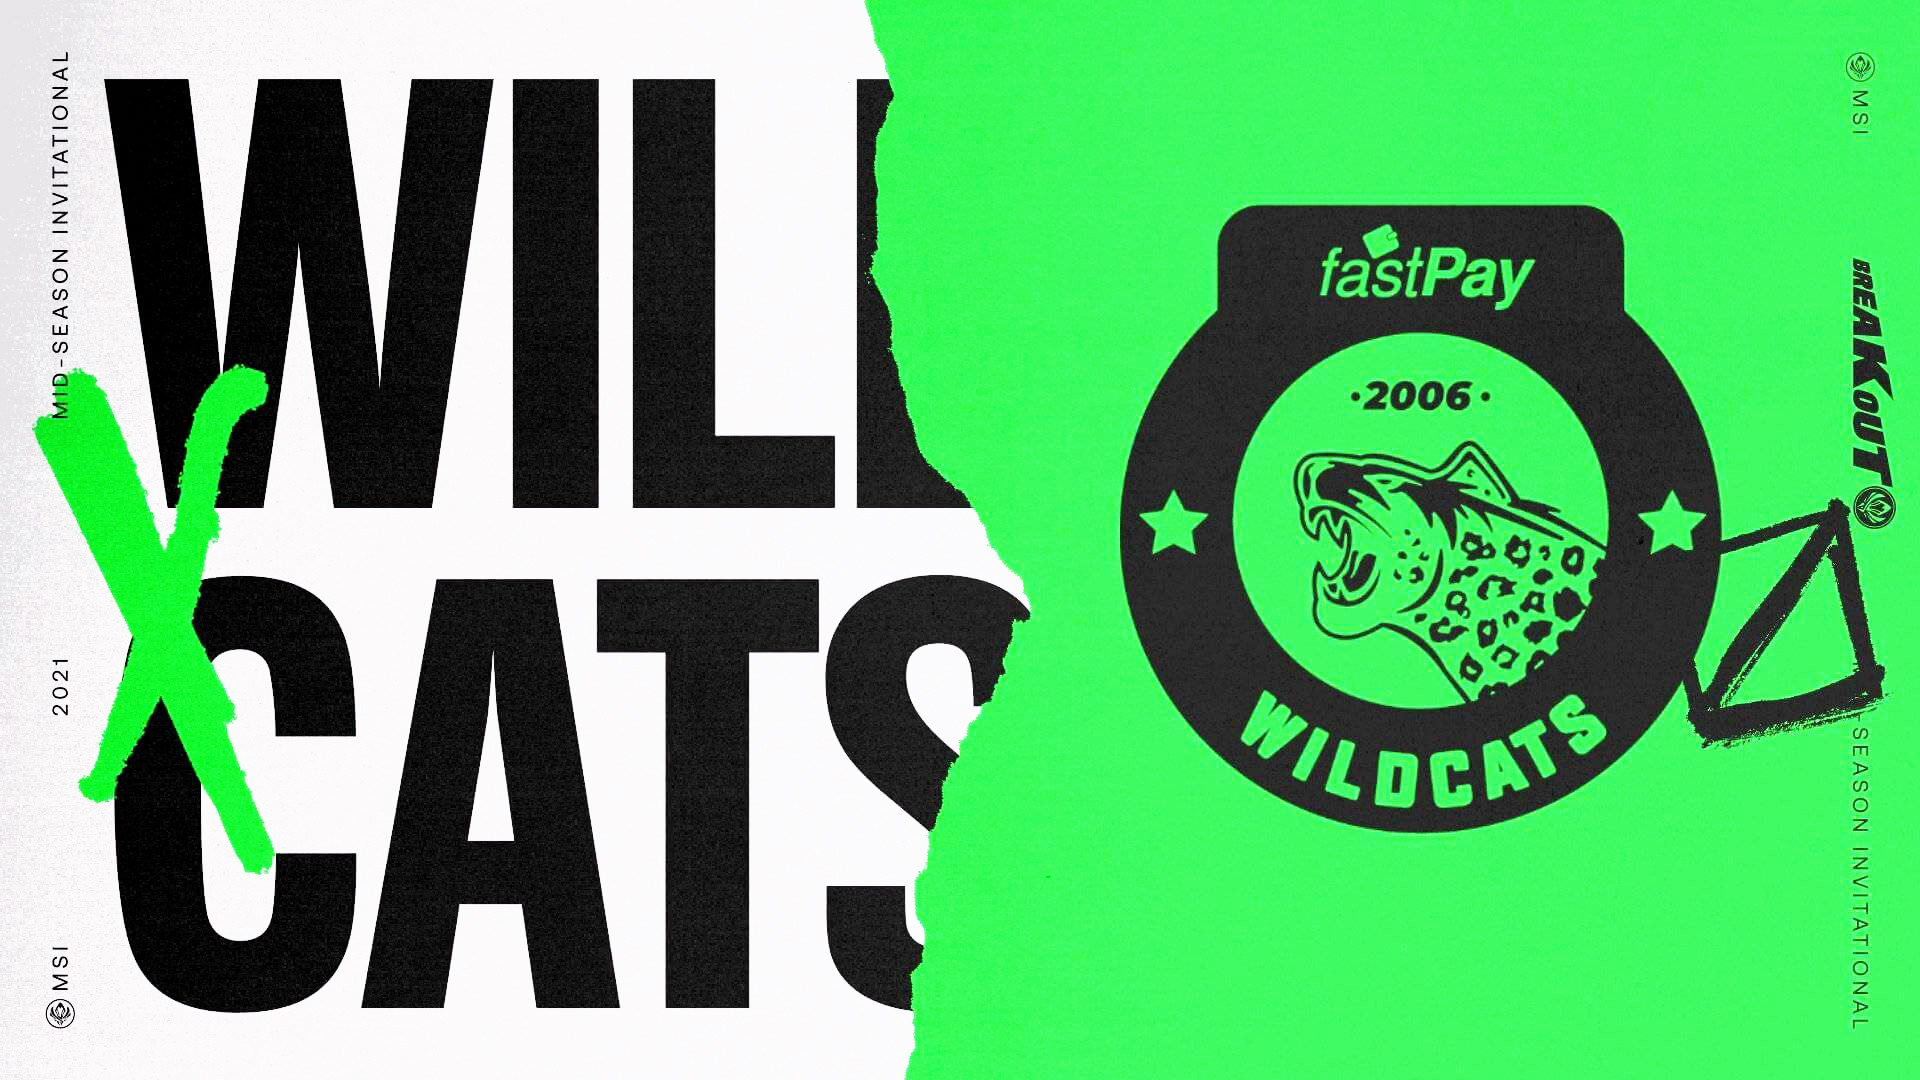 MSI 2021 fastPay Wildcats